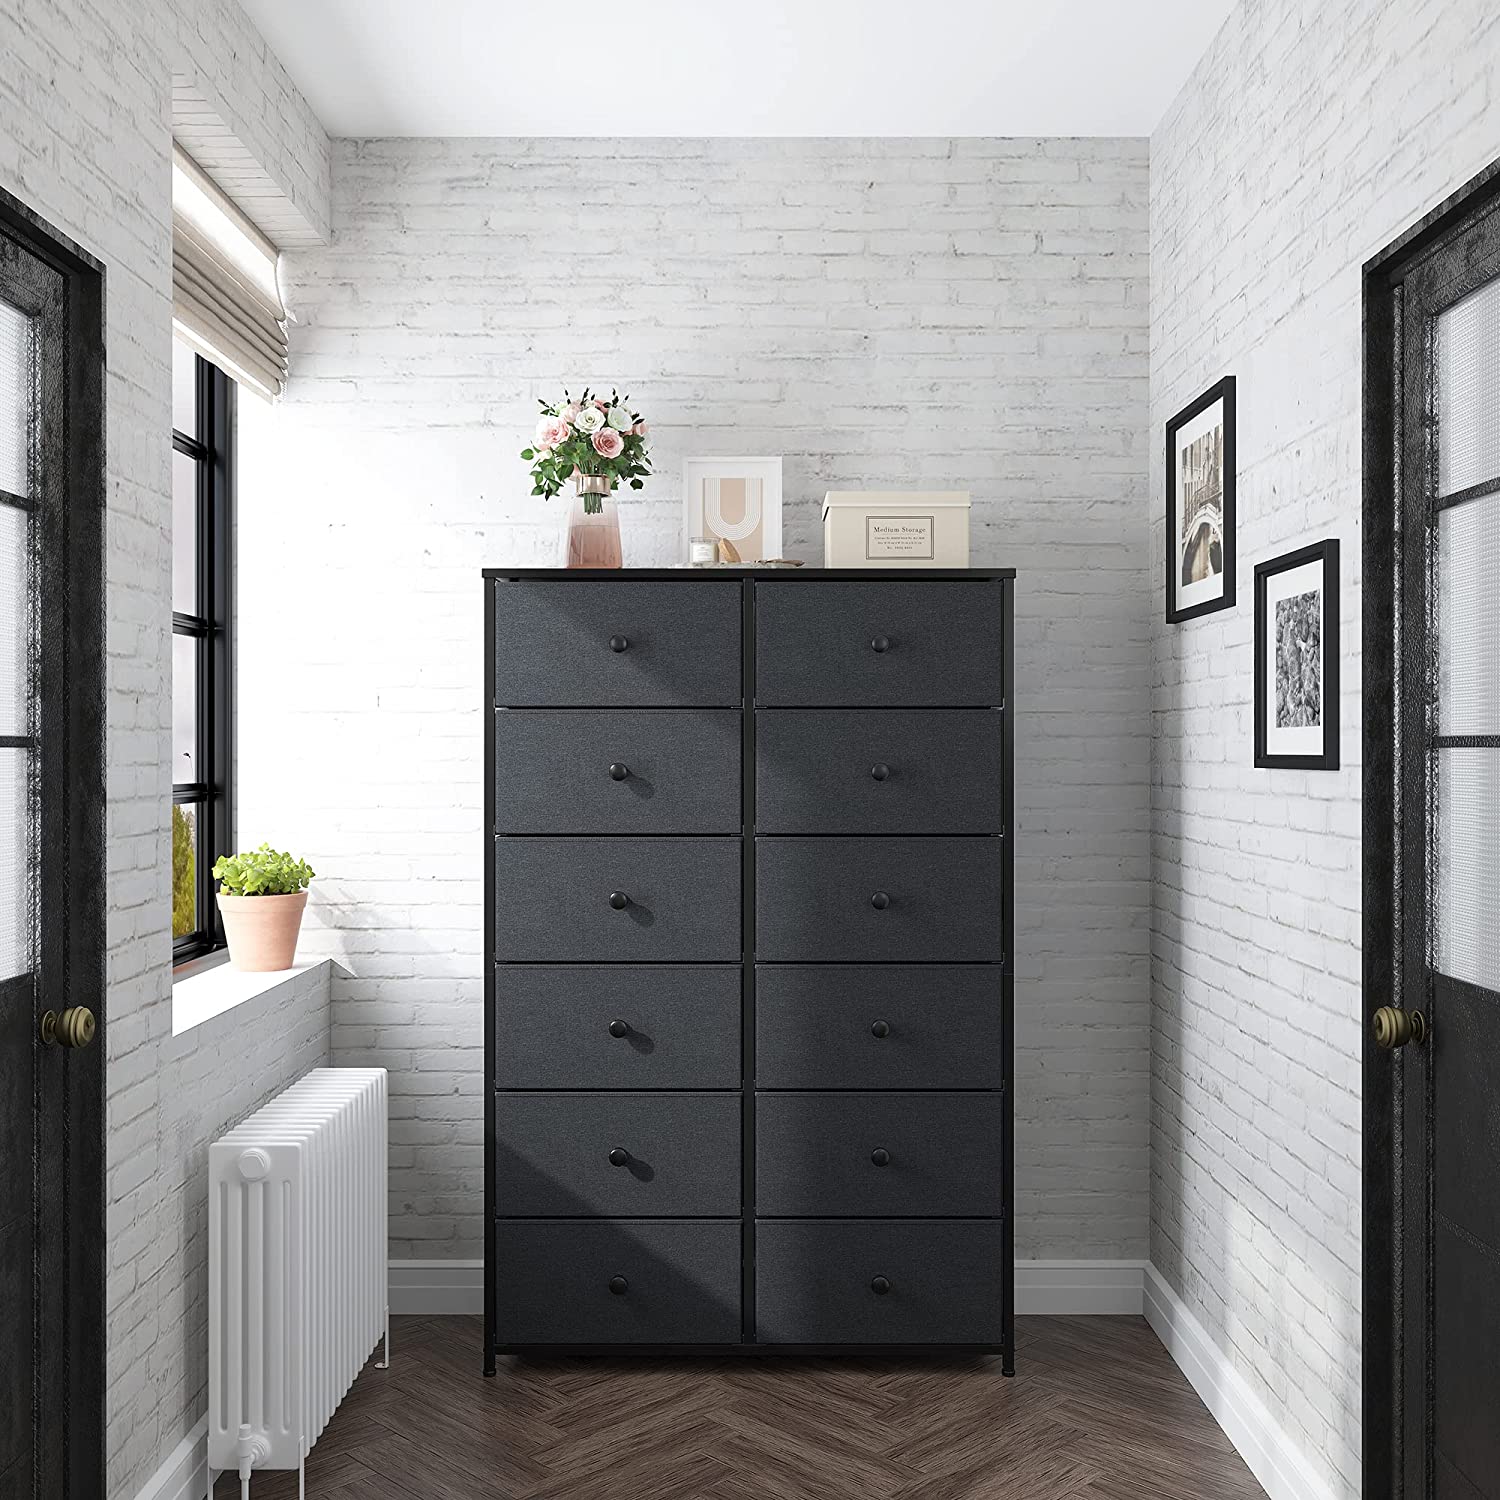 EnHomee Tall Black Dresser With 12 Drawers, Fabric Dresser